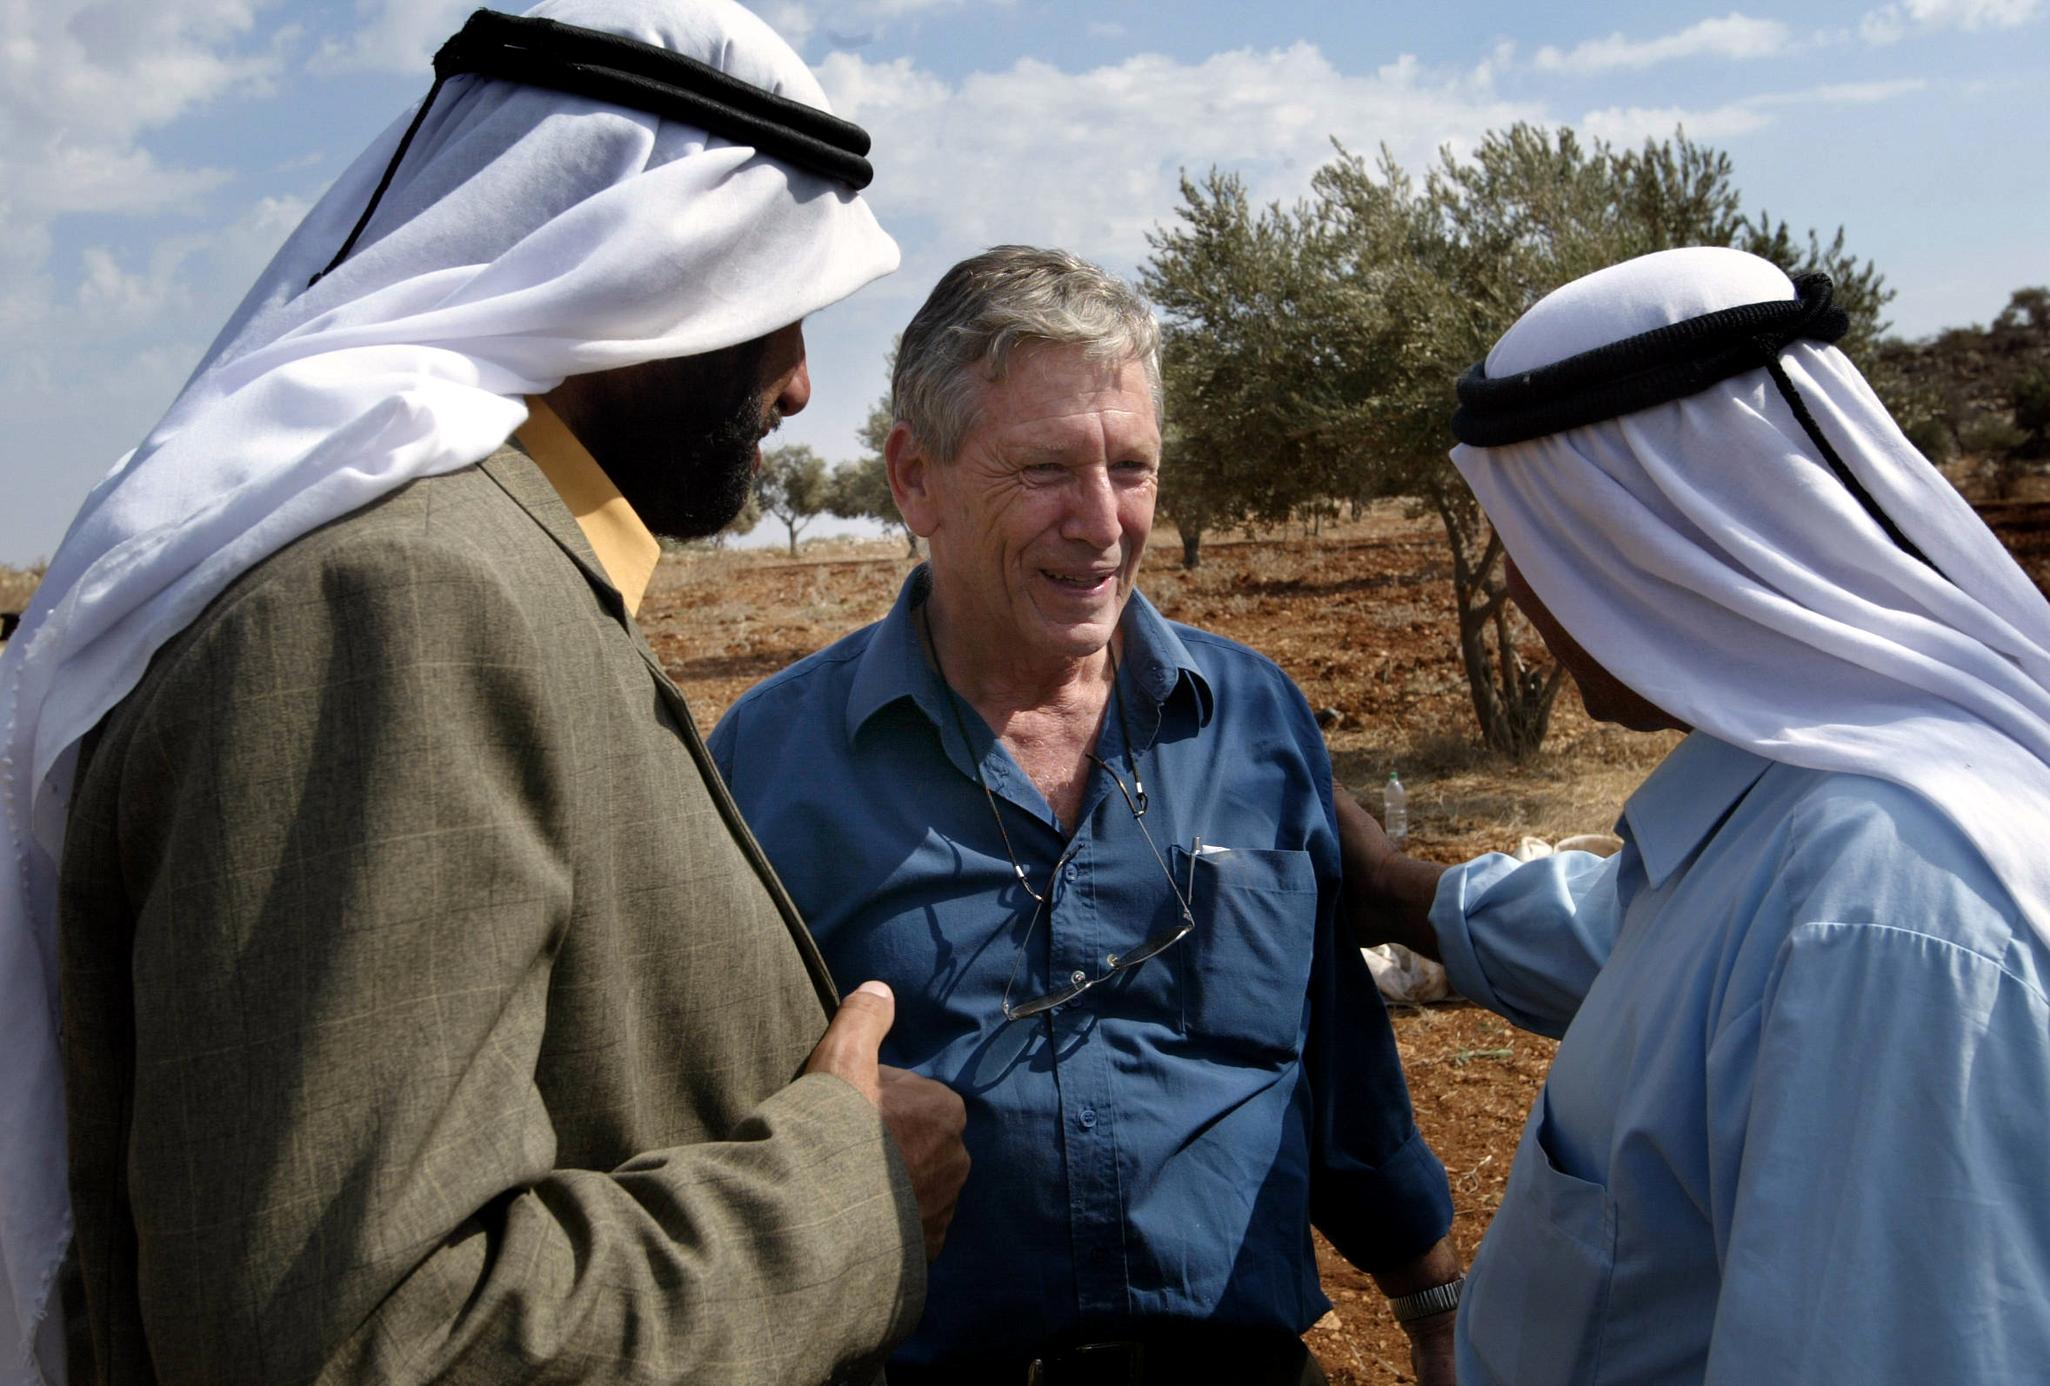 In this file photo taken on October 30, 2002 Israeli writer Amos Oz (C) talks with Palestinian men after picking olives in the West Bank village of Aqraba, south of Nablus.